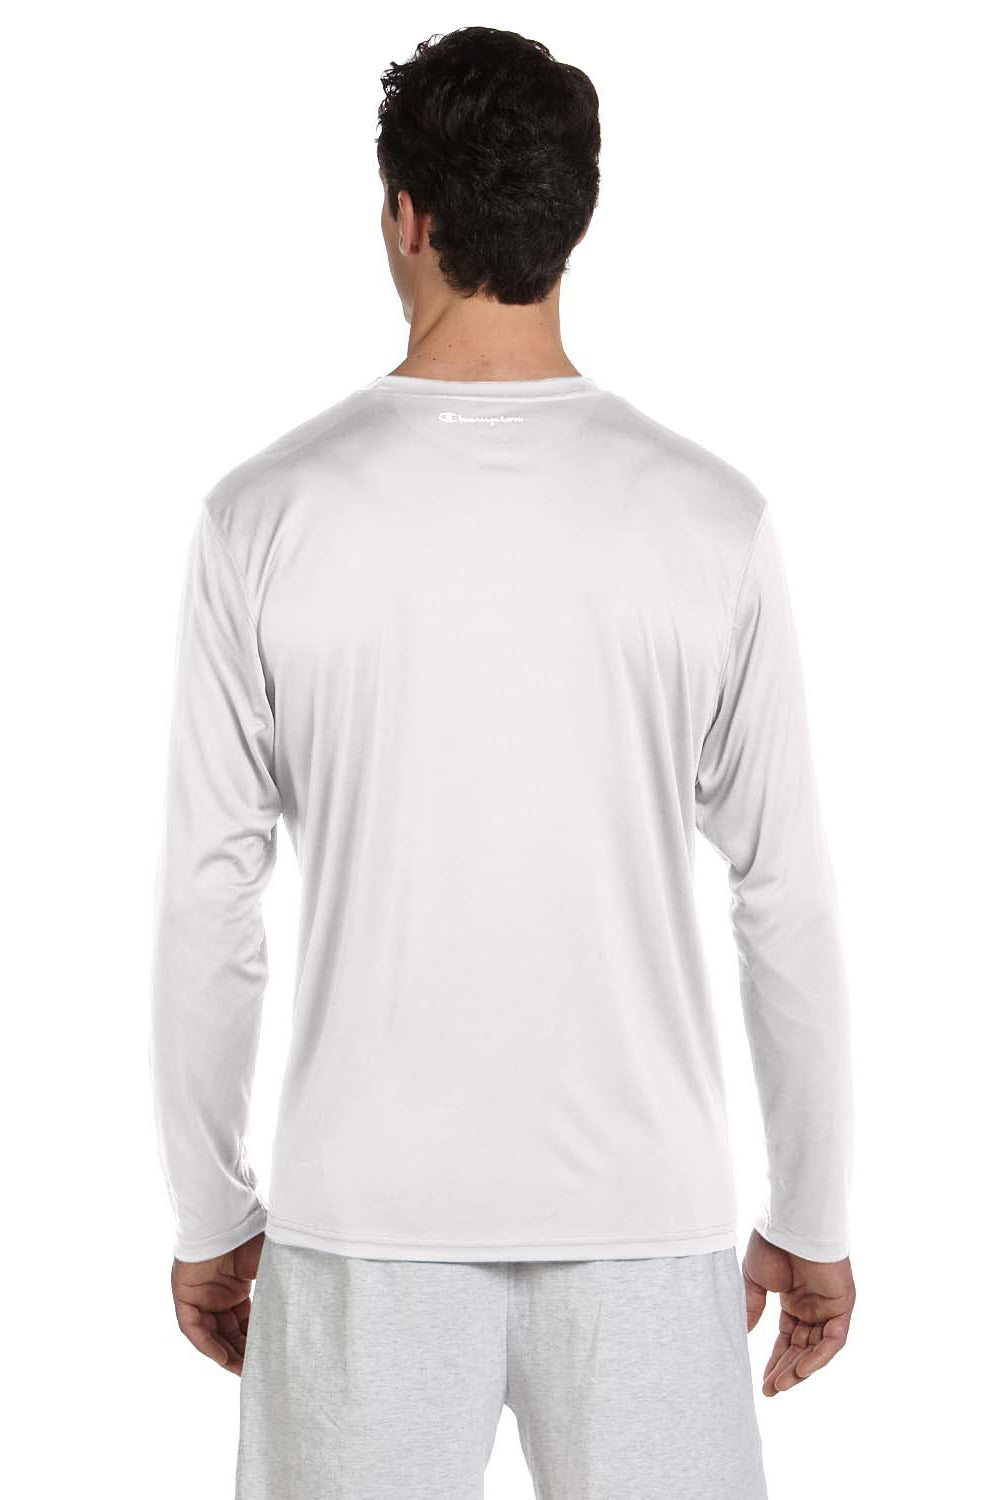 Champion CW26 Mens Double Dry Moisture Wicking Long Sleeve Crewneck T-Shirt White Back